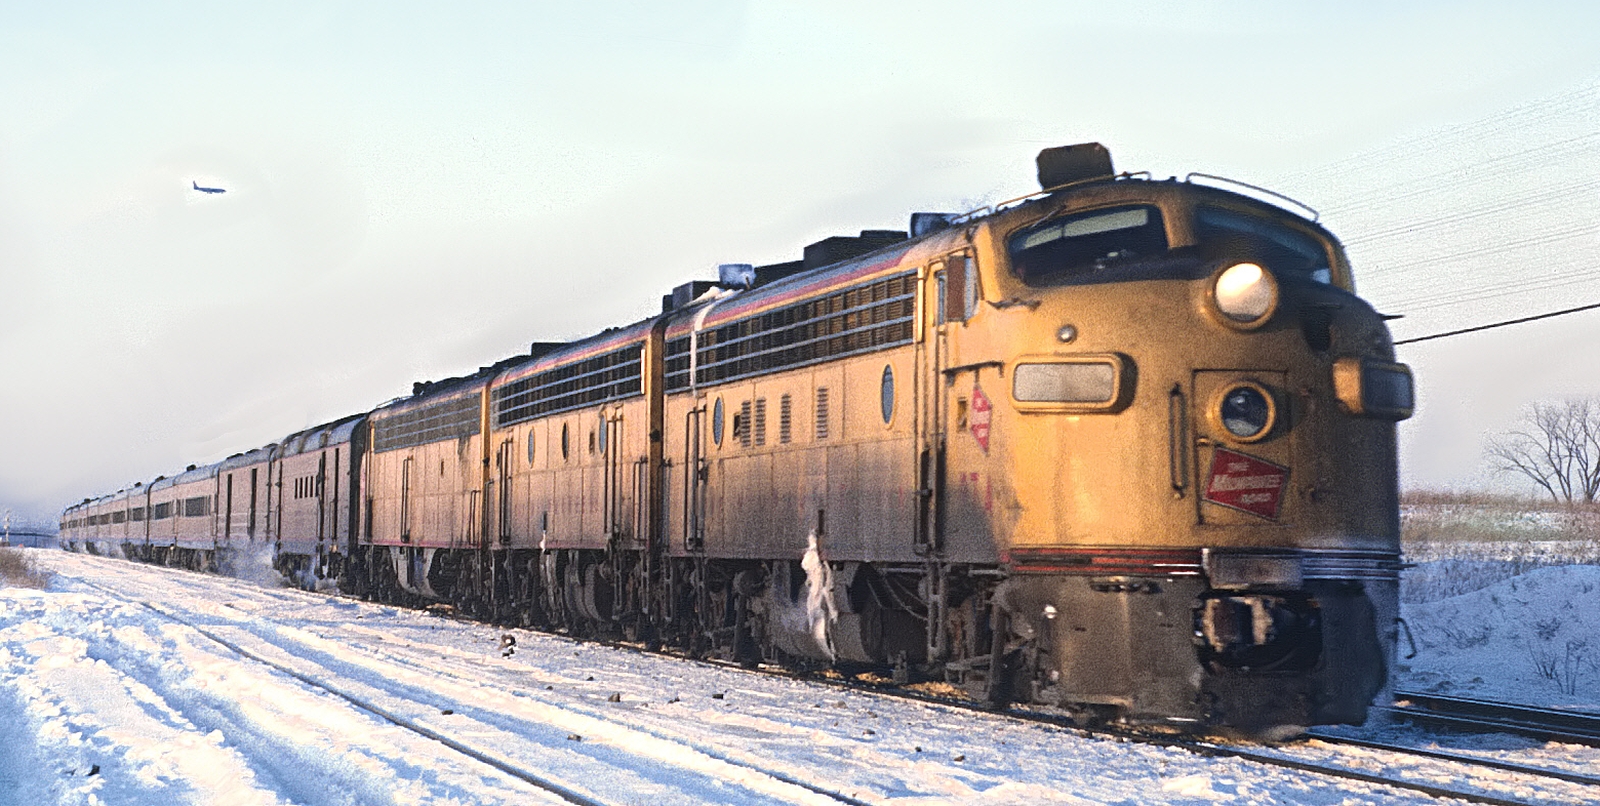 The “Moring Hiawatha” in January 1966 with two A and one B unit at Lake, Wisconsin